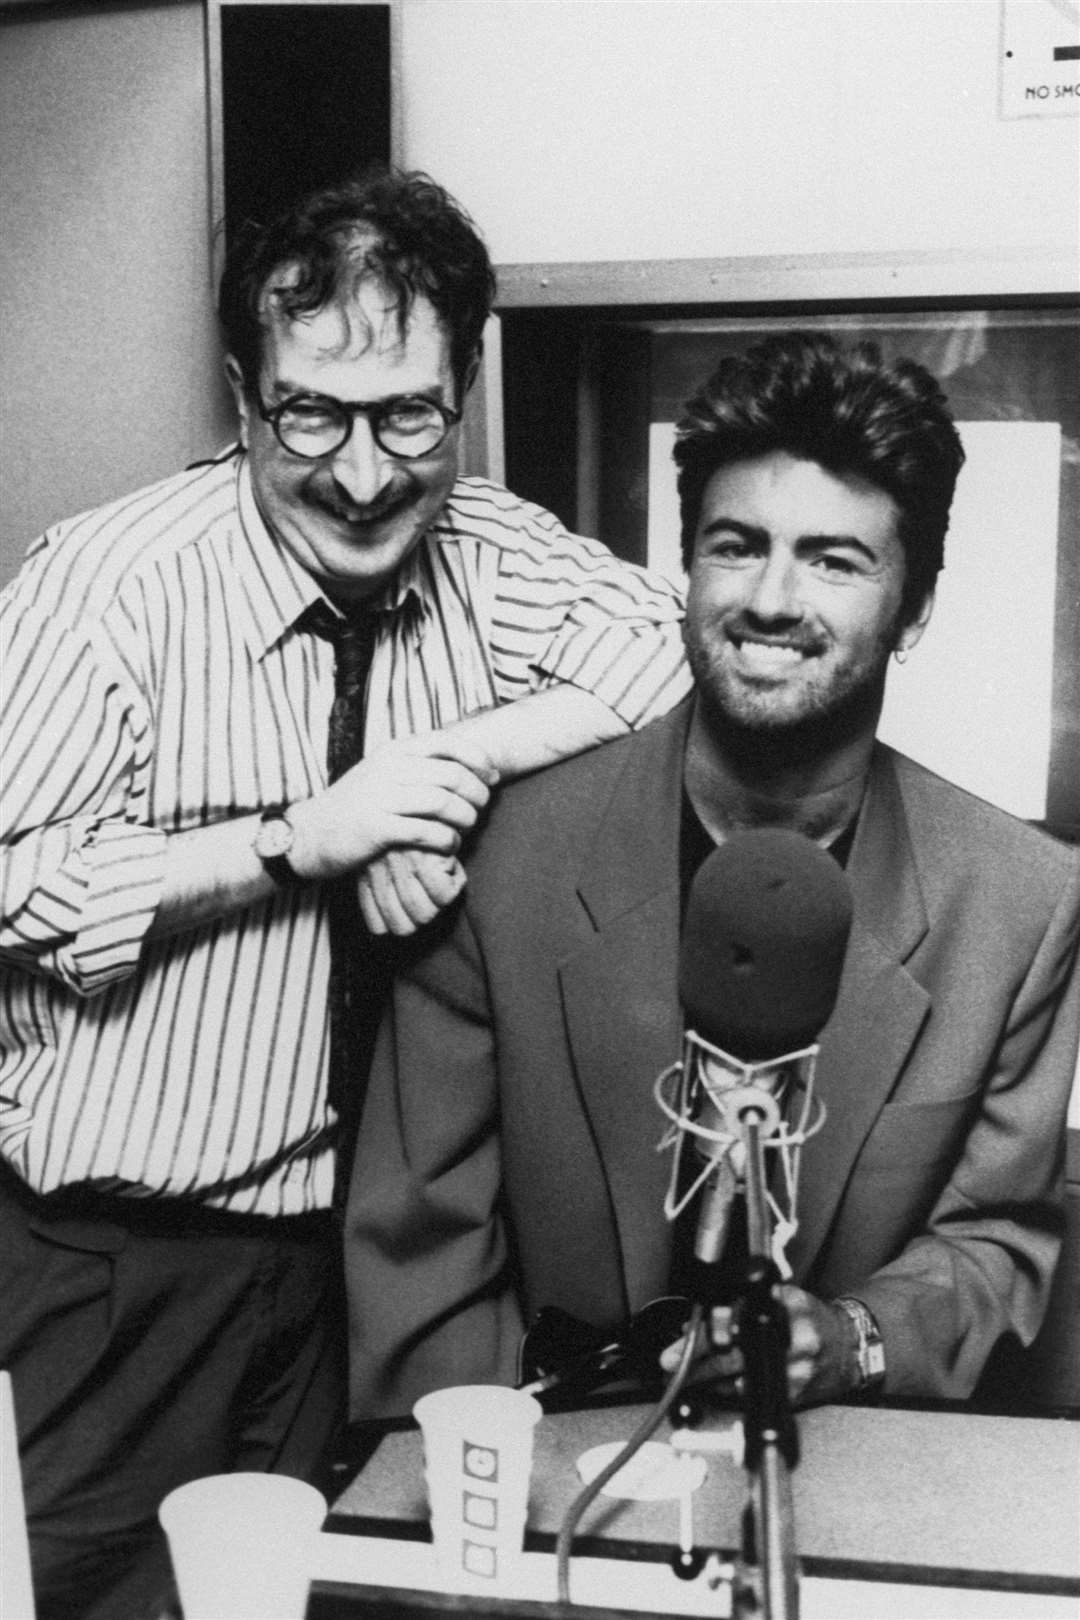 George Michael pictured with BBC Radio 1 DJ Steve Wright (PA)